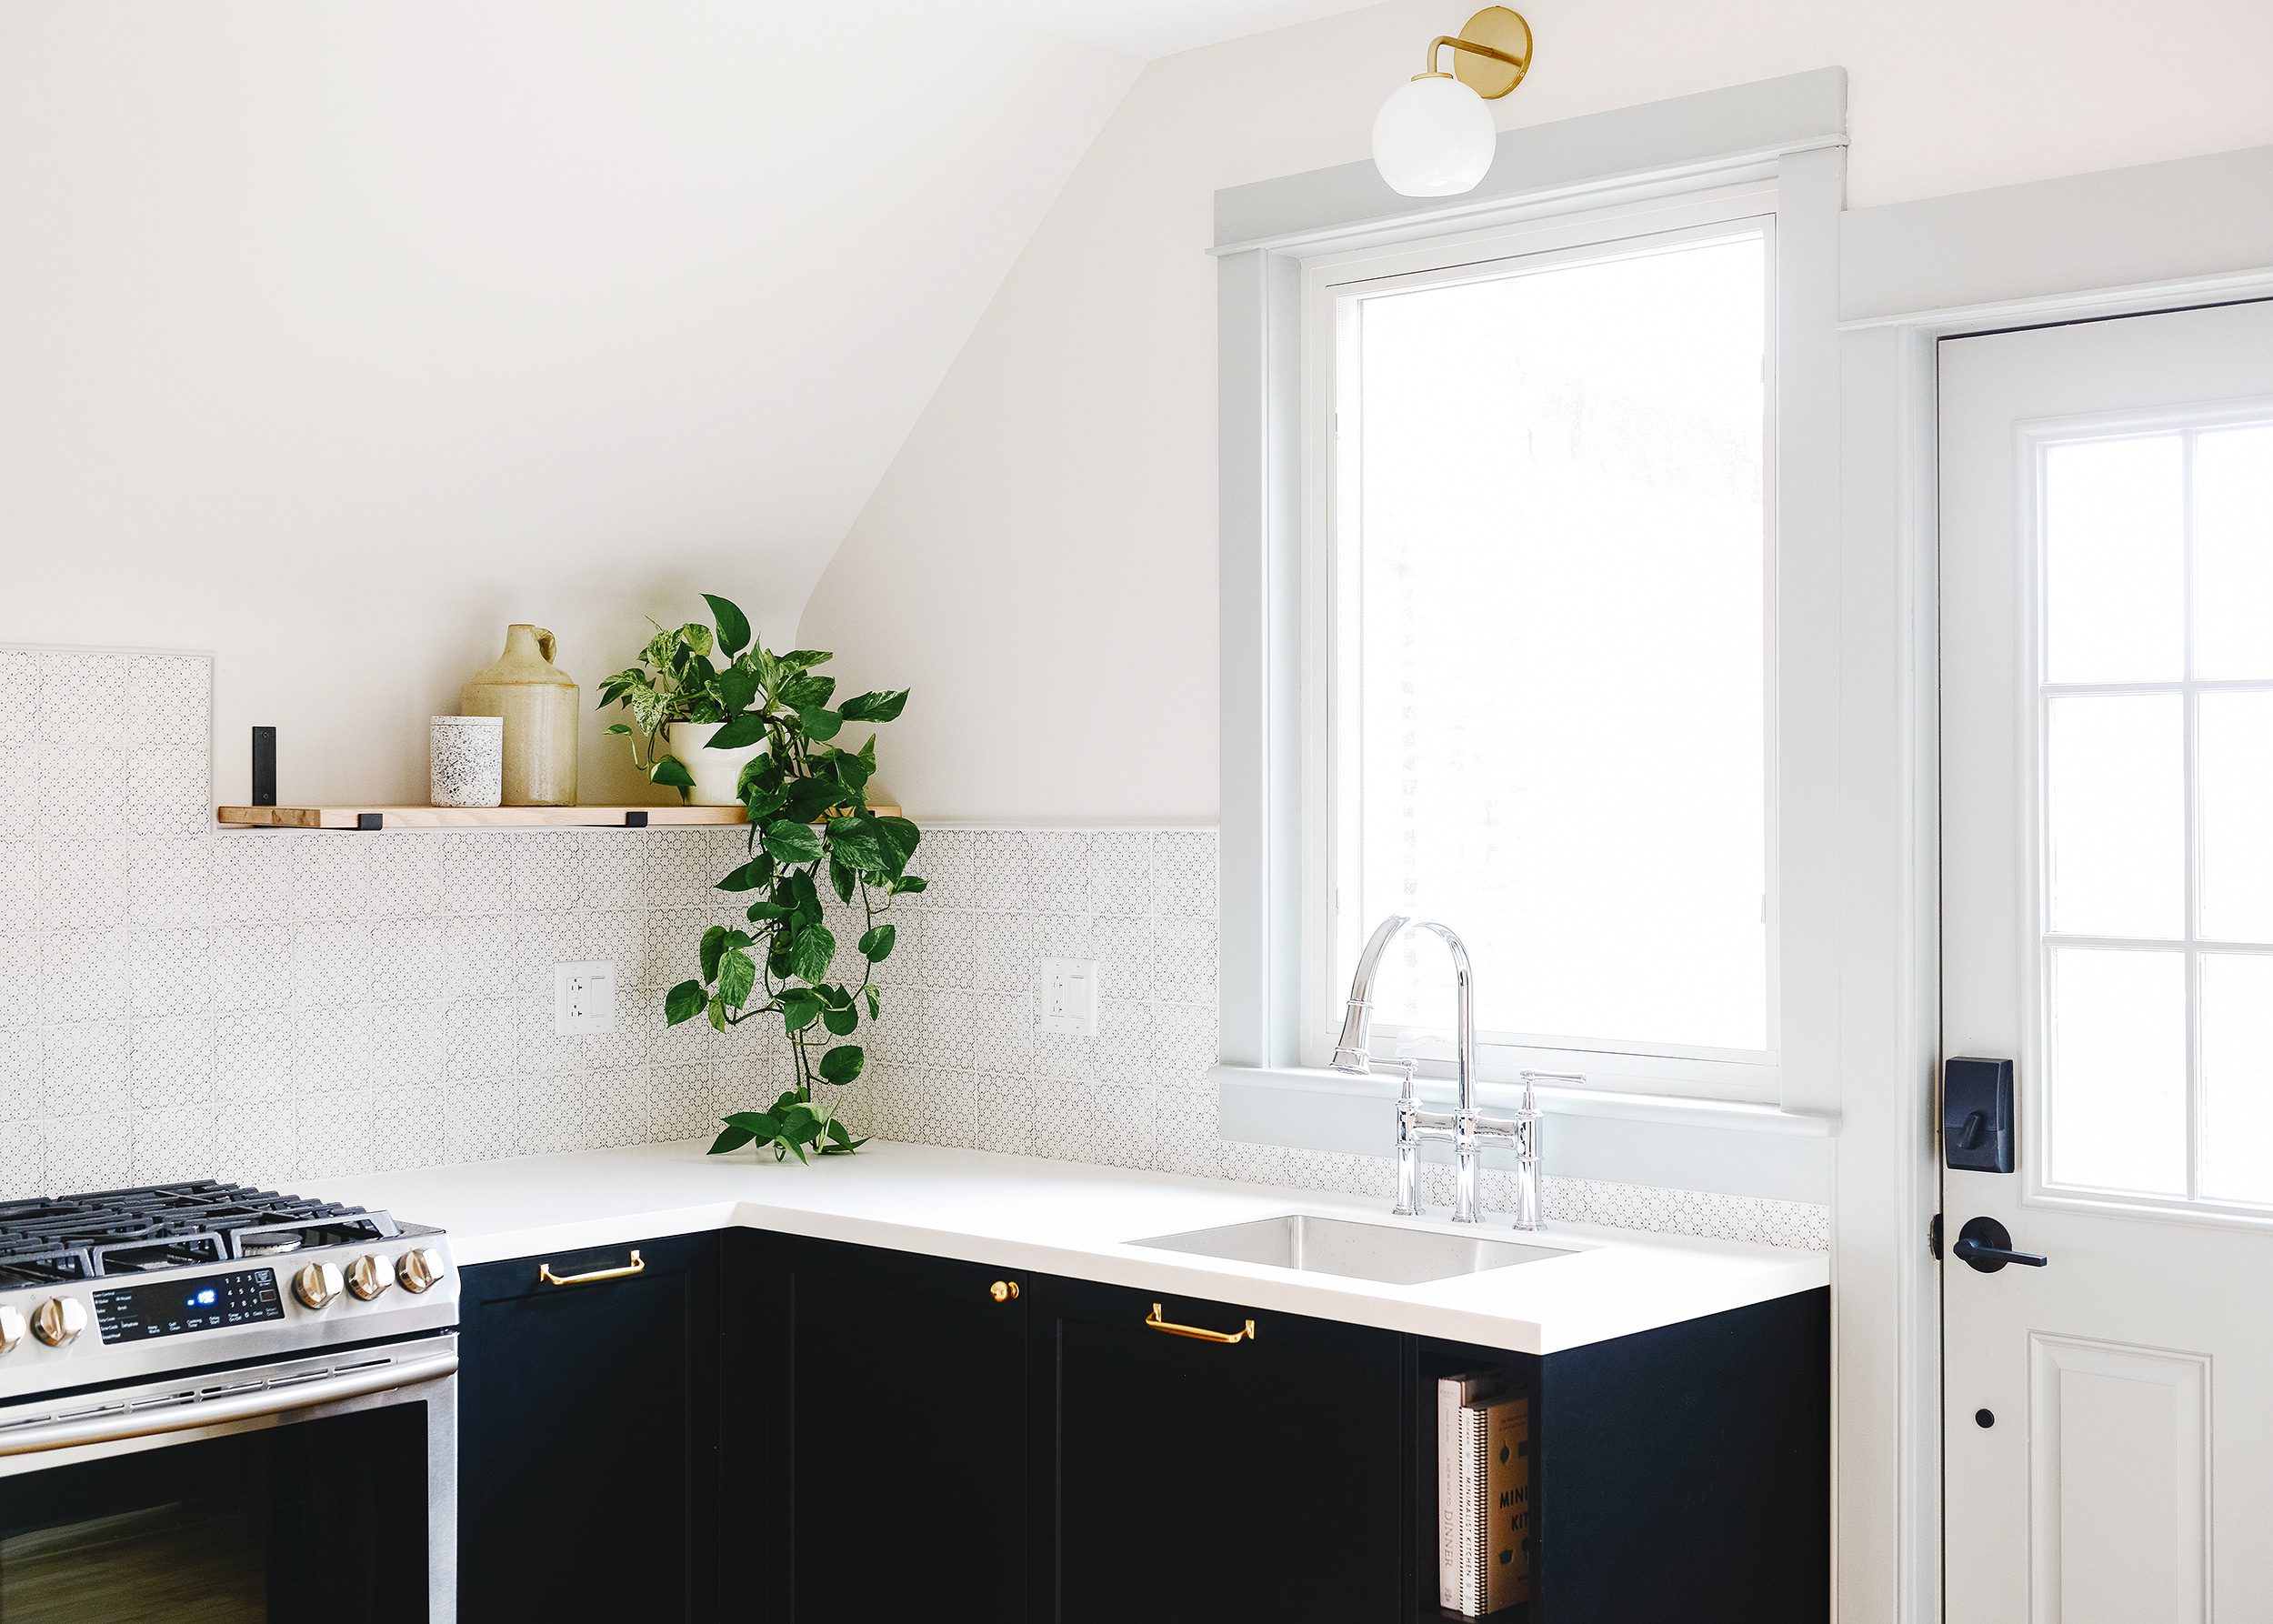 Formica countertops in Bleached Concrete with black cabinets | via Yellow Brick Home